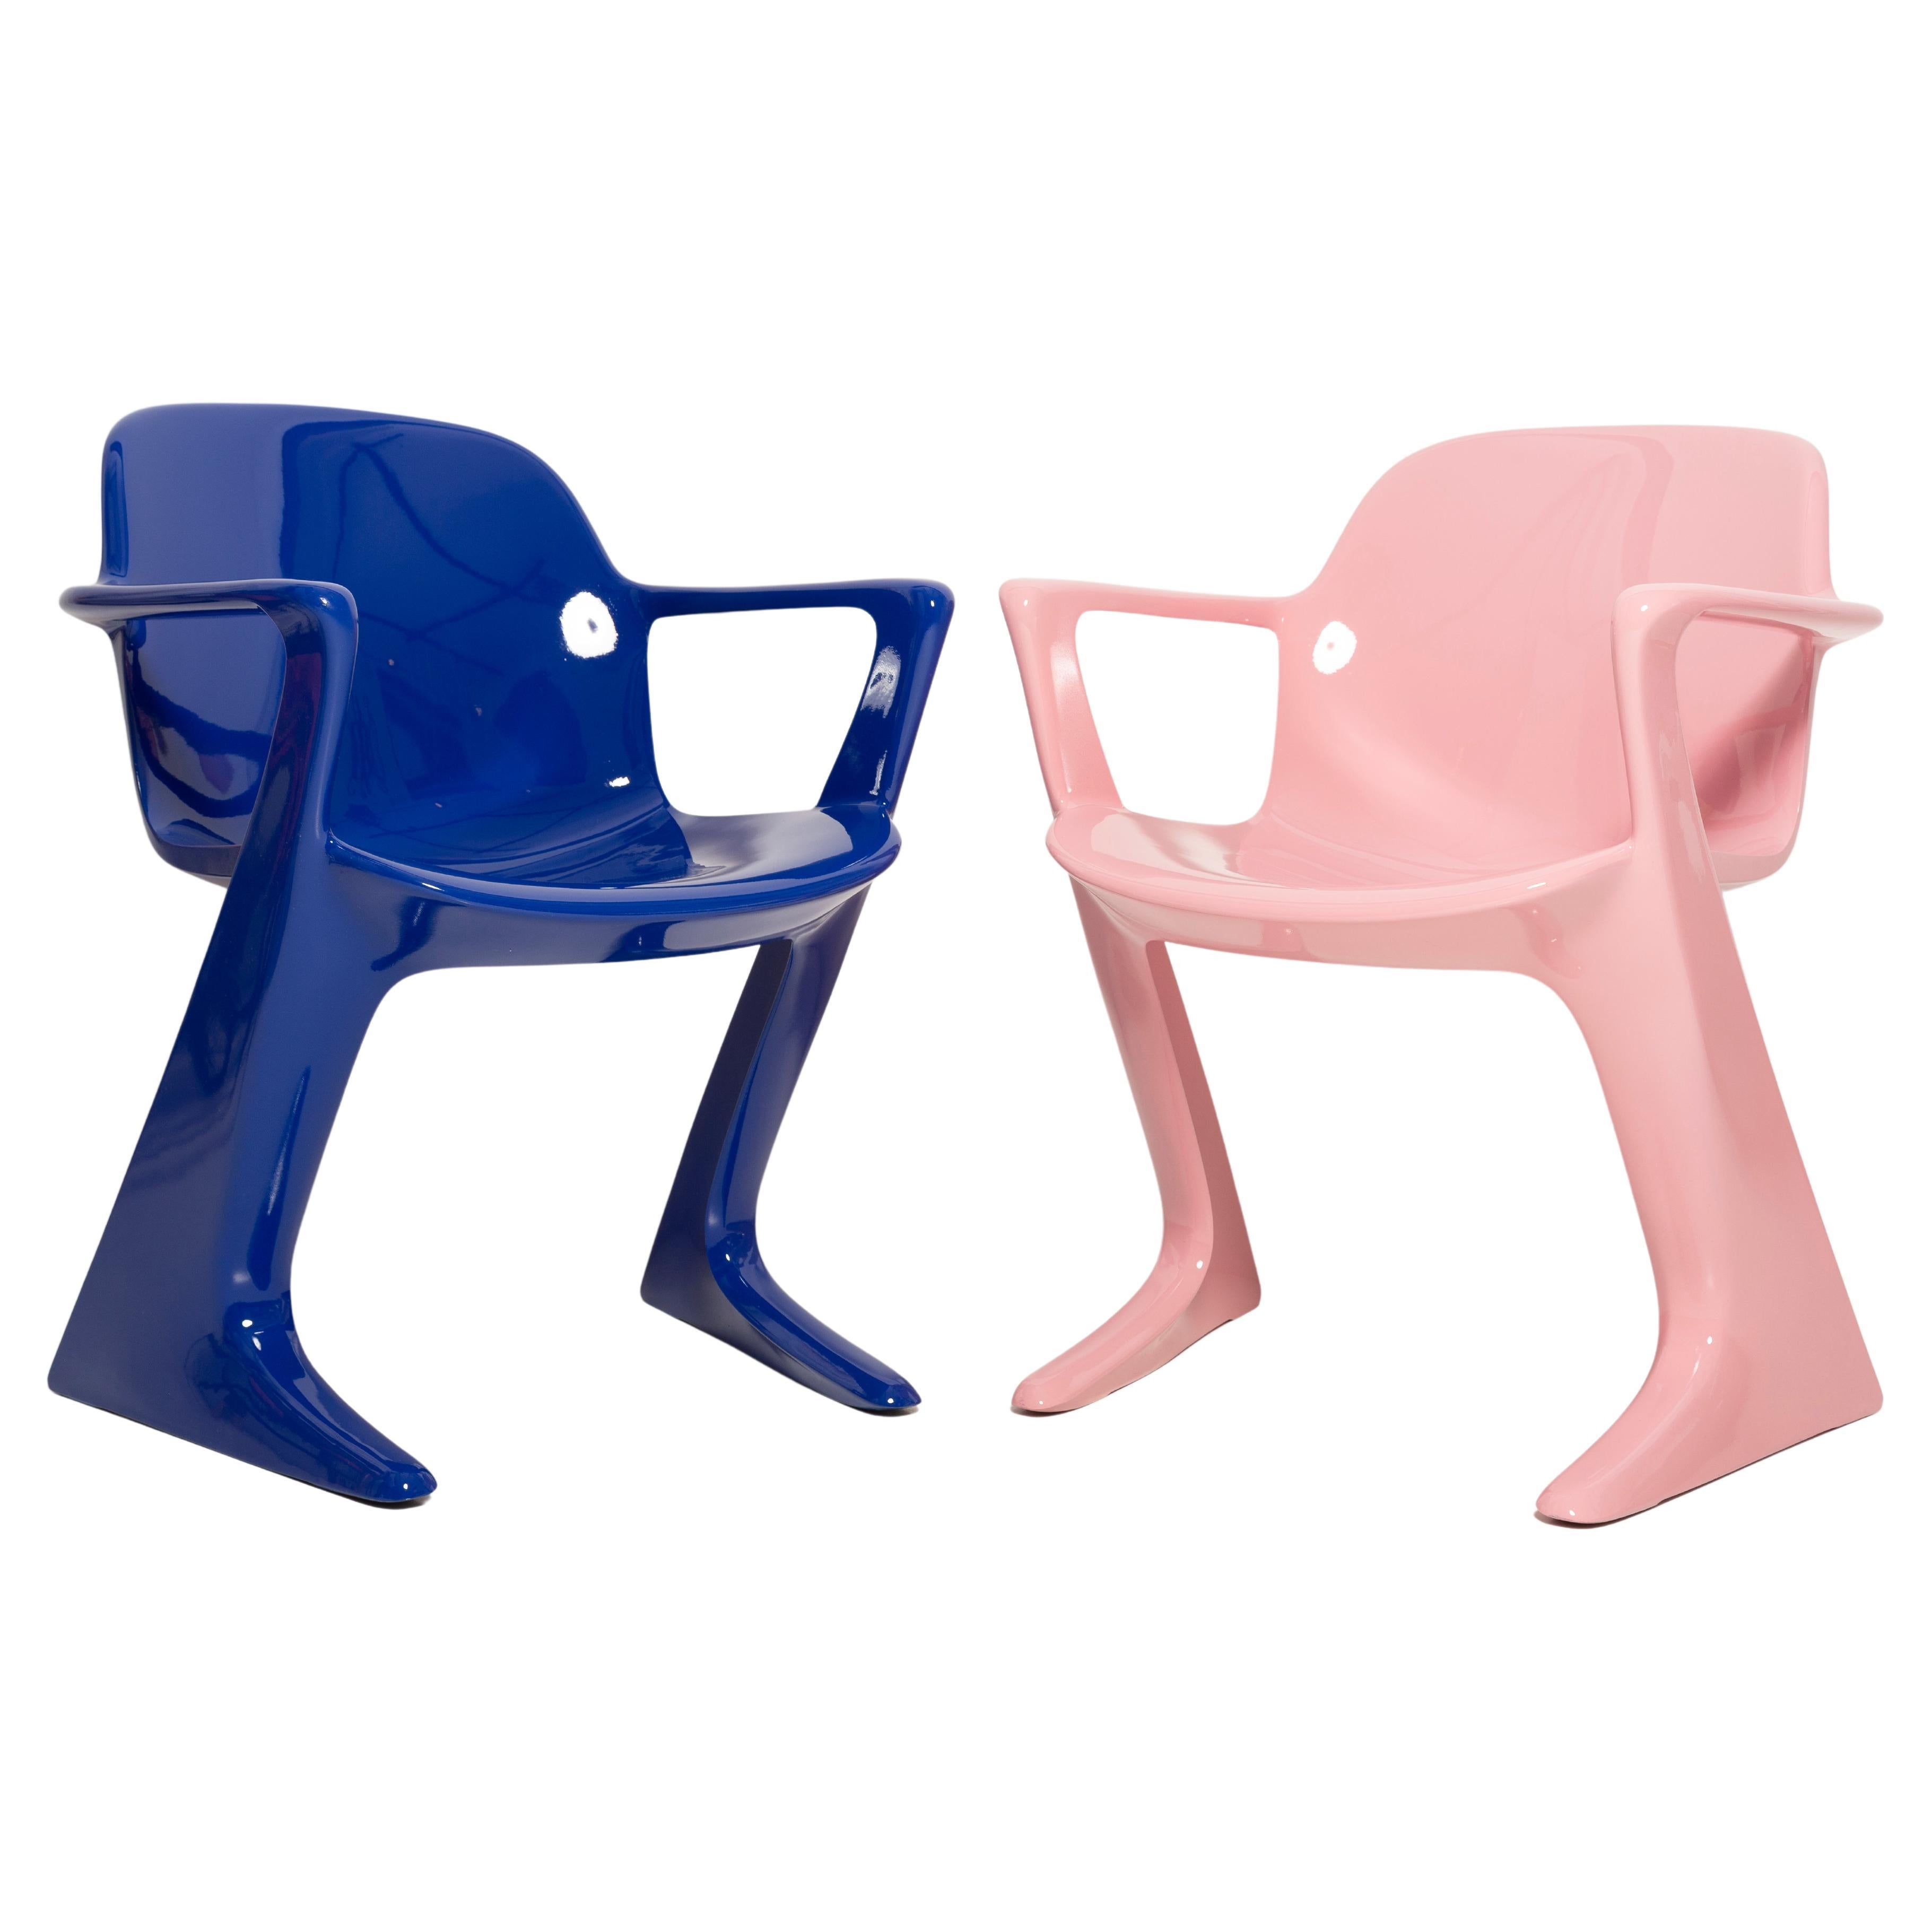 Two Mid-Century Baby Pink and Blue Kangaroo Chairs, Ernst Moeckl, Germany, 1968